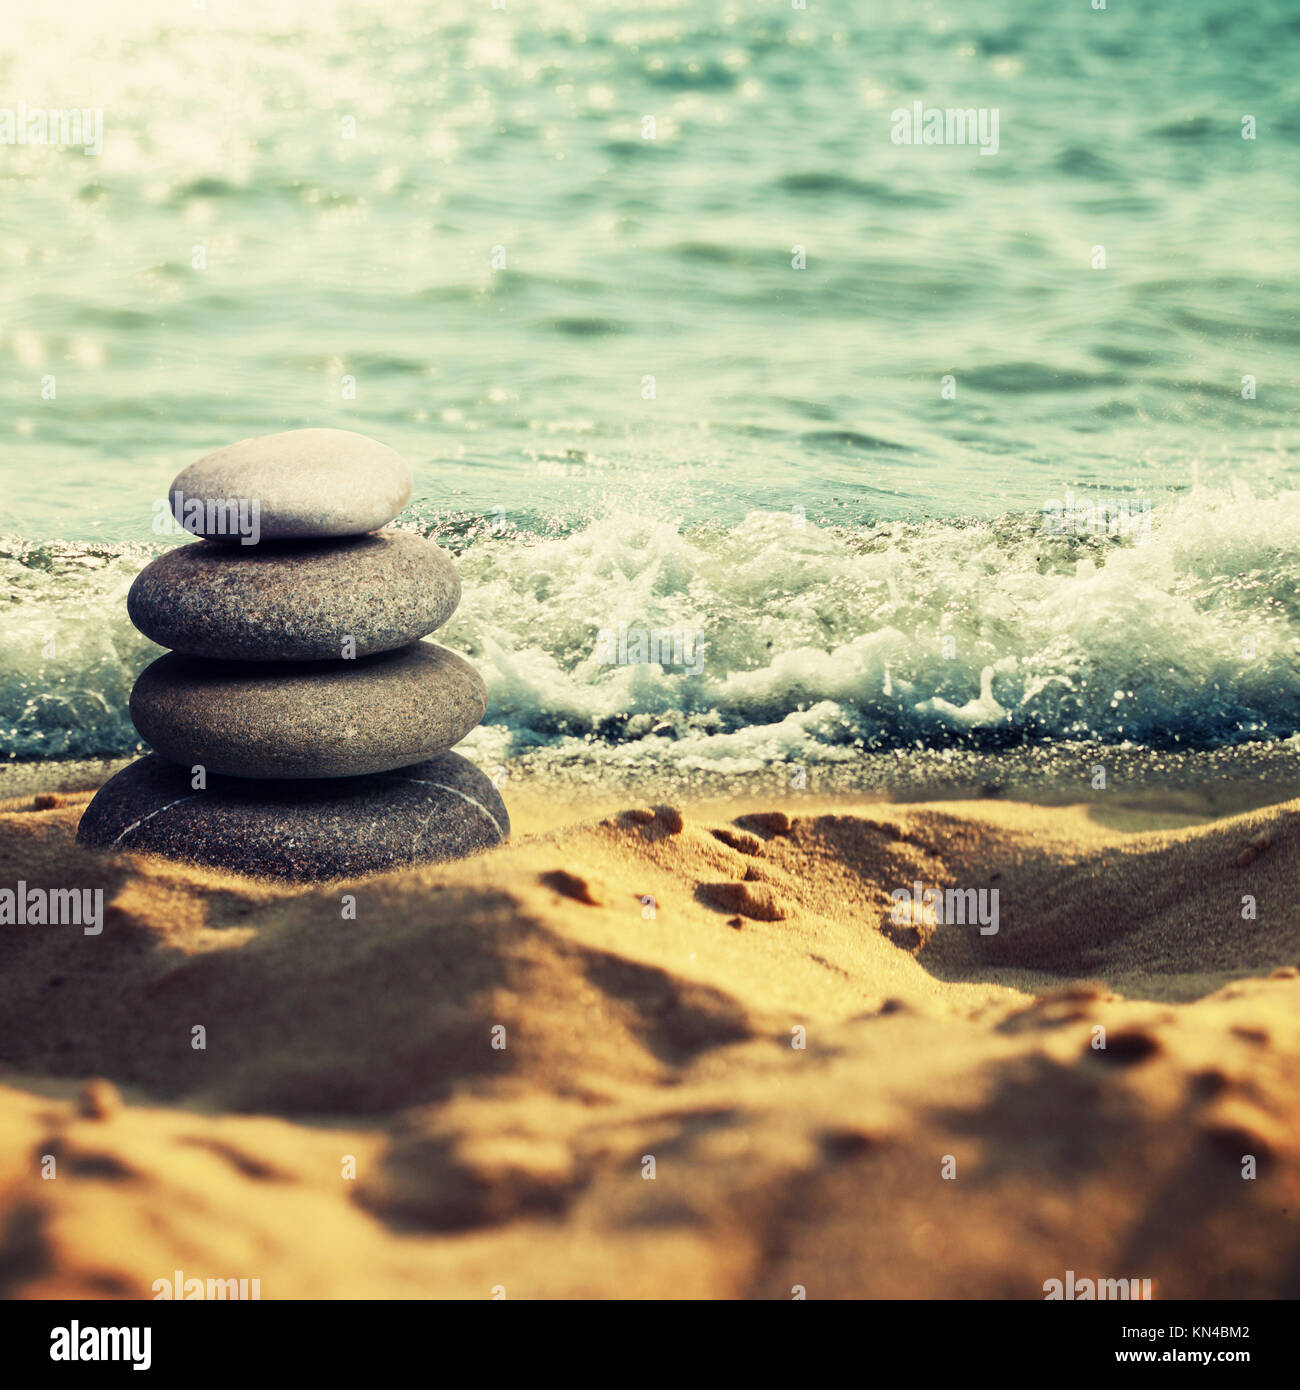 Pebble on the sand, abstract tranquil scene. Stock Photo